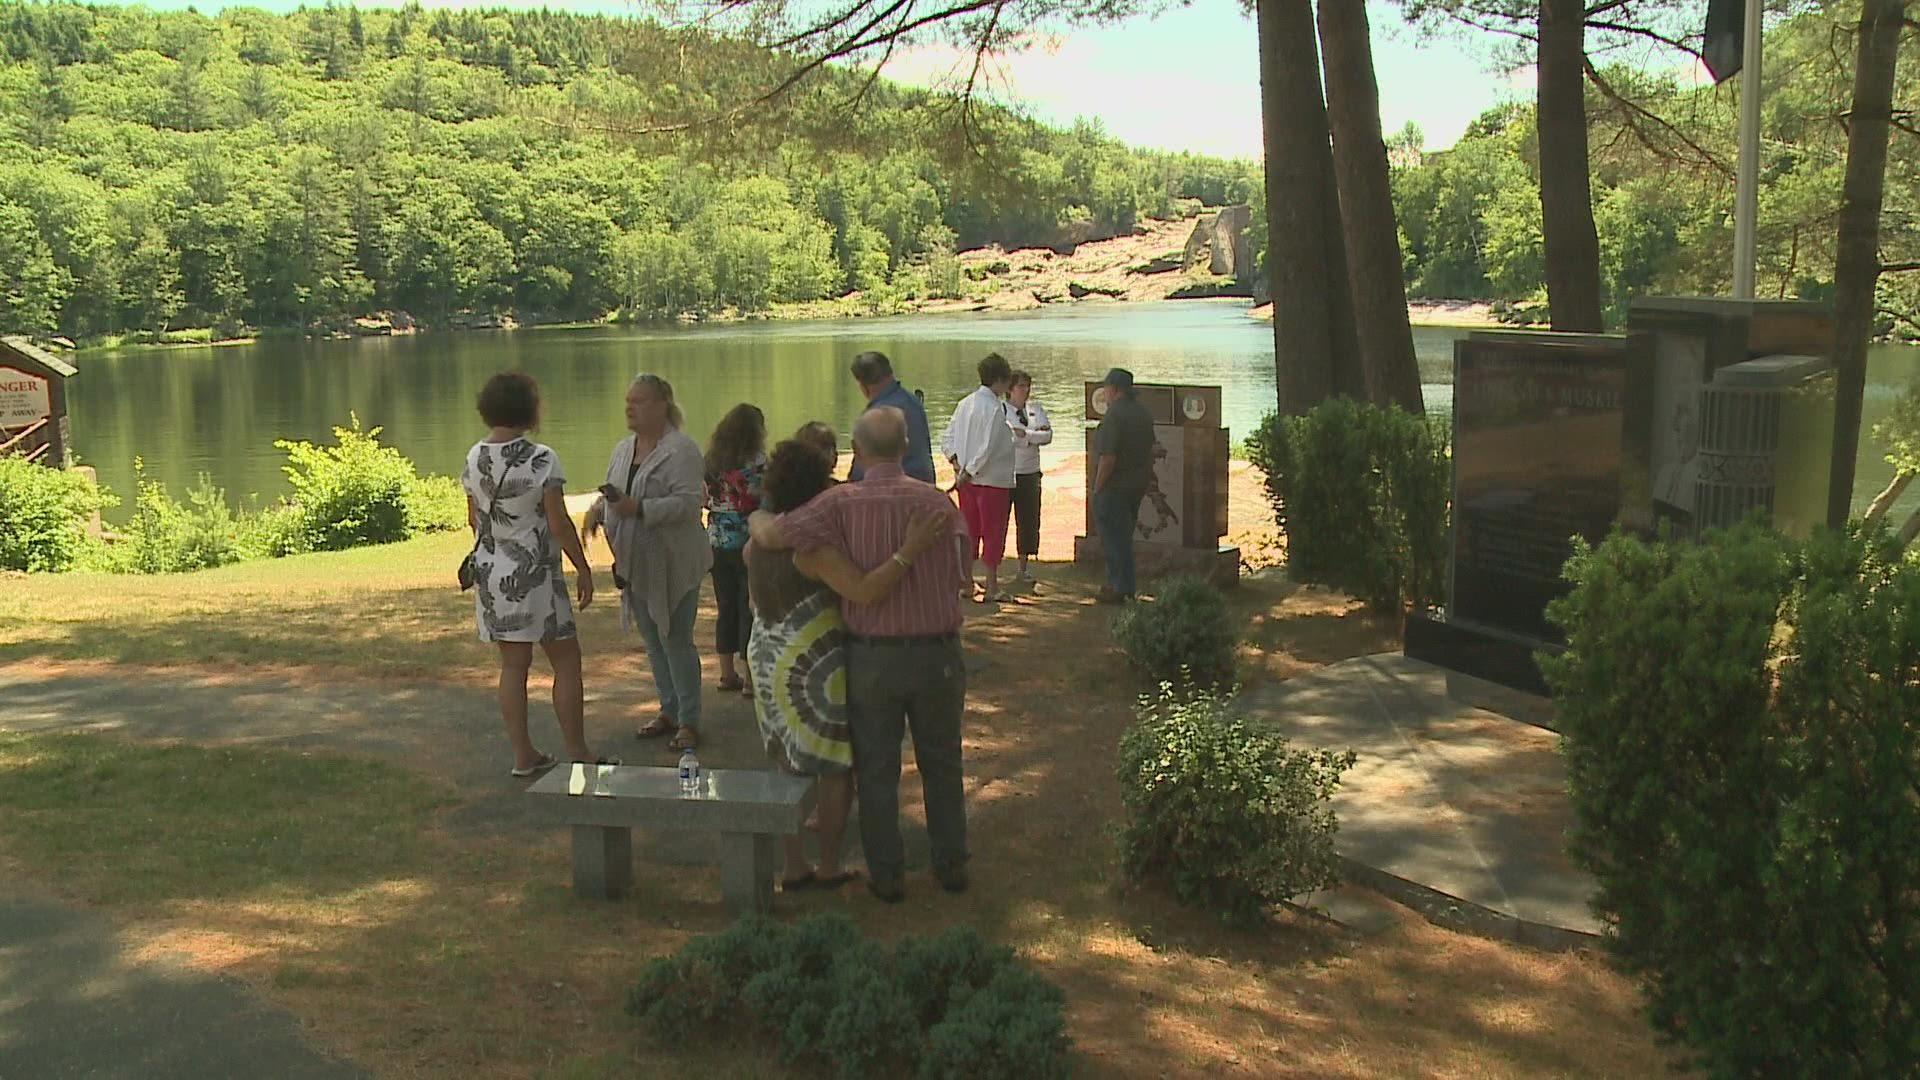 More than 70 families who came to the town during the late 1800s and early 1900s were commemorated.